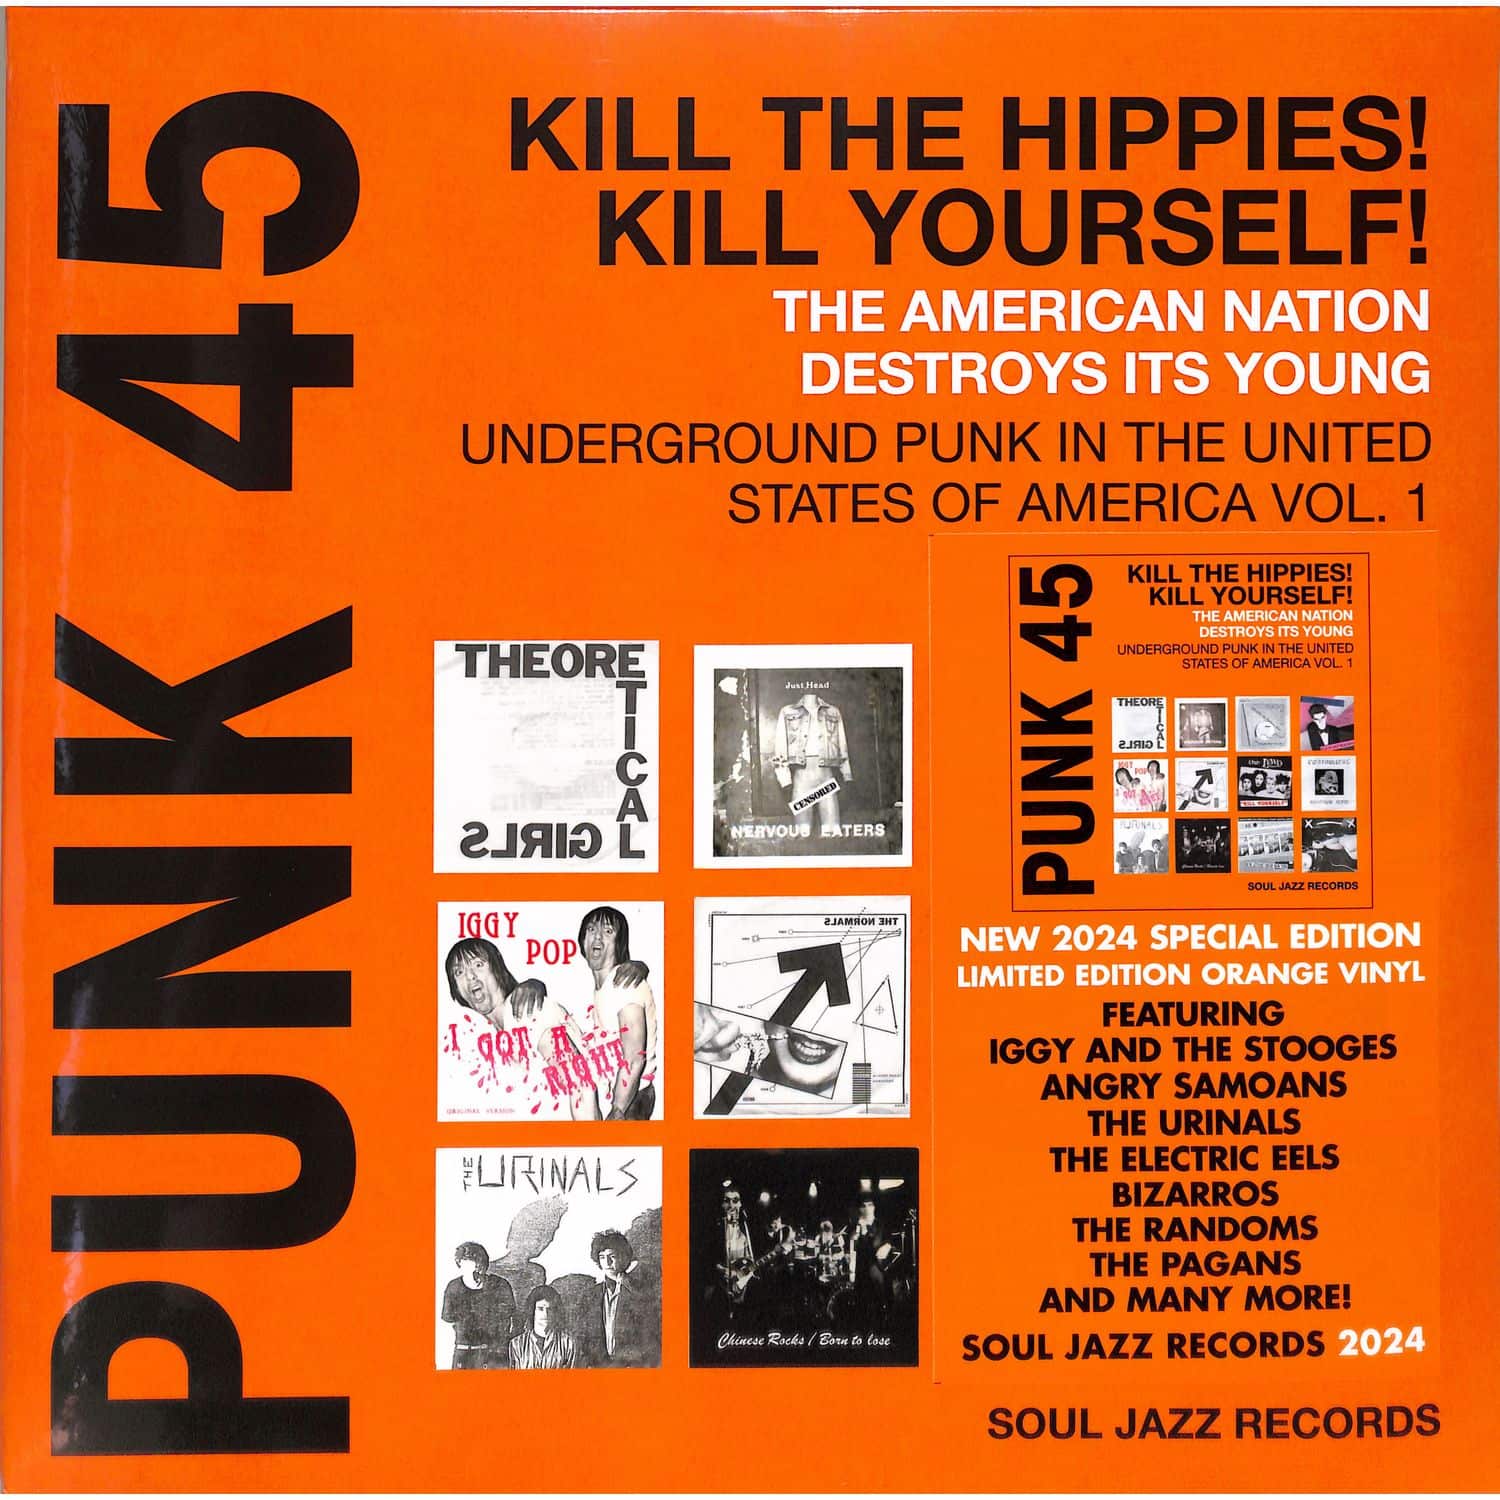 Va / Soul Jazz Records Presents - PUNK 45: KILL THE HIPPIES! KILL YOURSELF! - THE AMERICAN NATION DESTROYS ITS YOUNG: UNDERGROUND PUNK IN THE UNITED STATES OF AMERICA, 1973-1980 